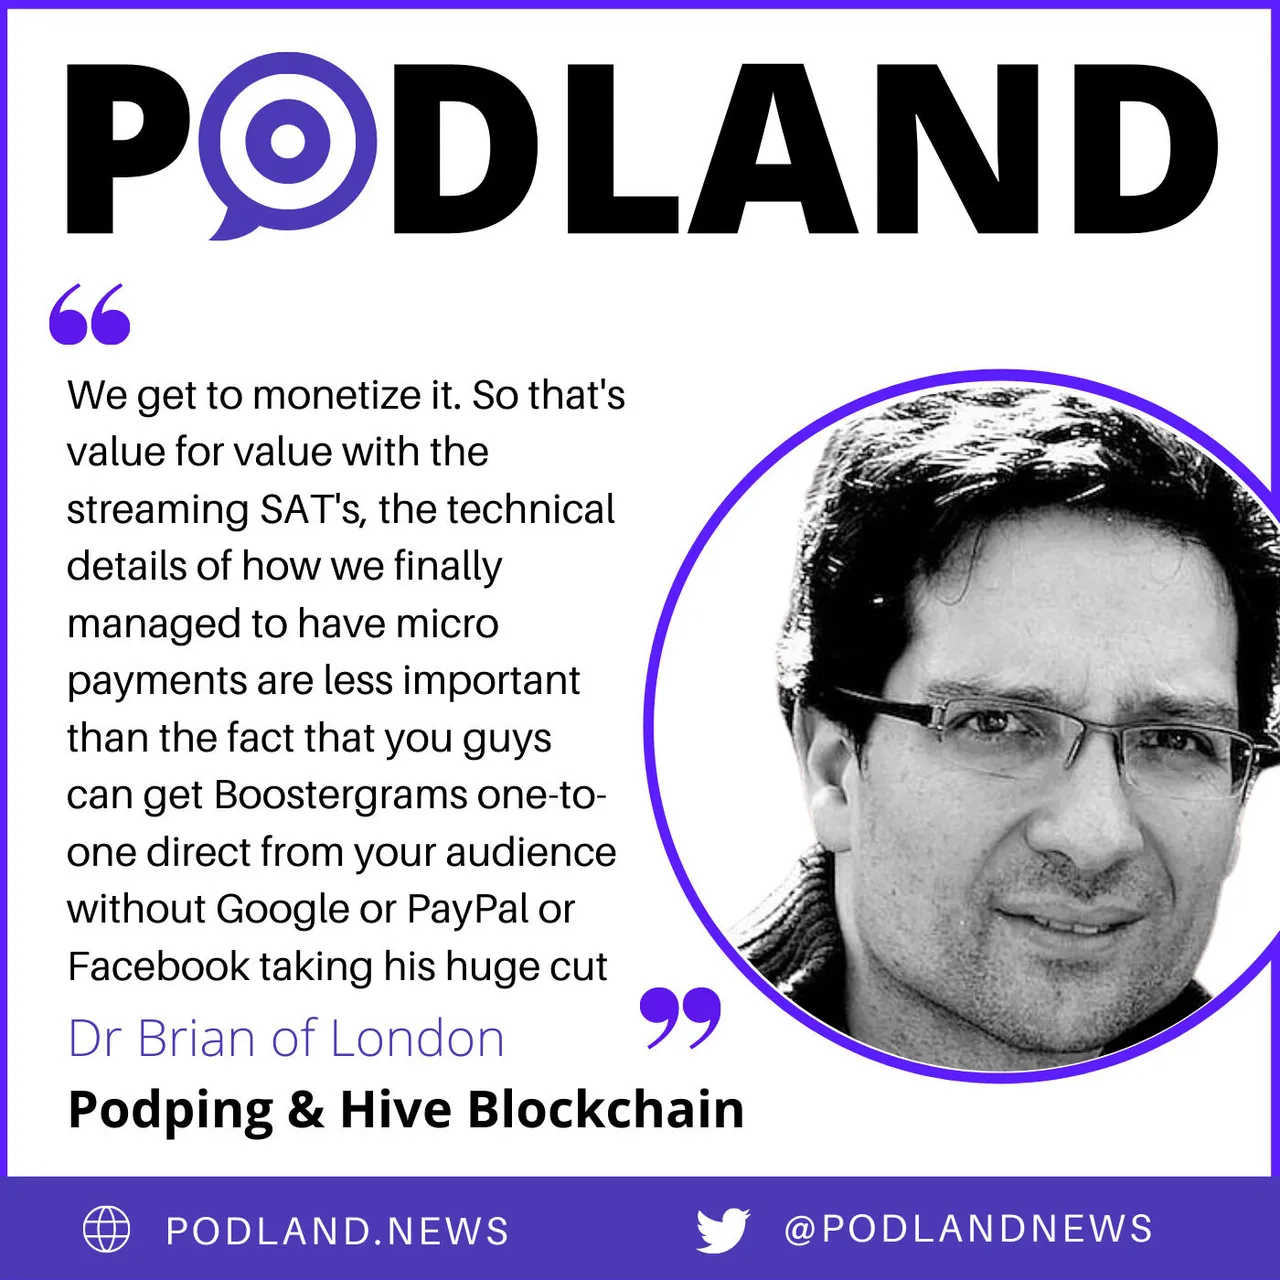 Podland cover with quote from Brian of London